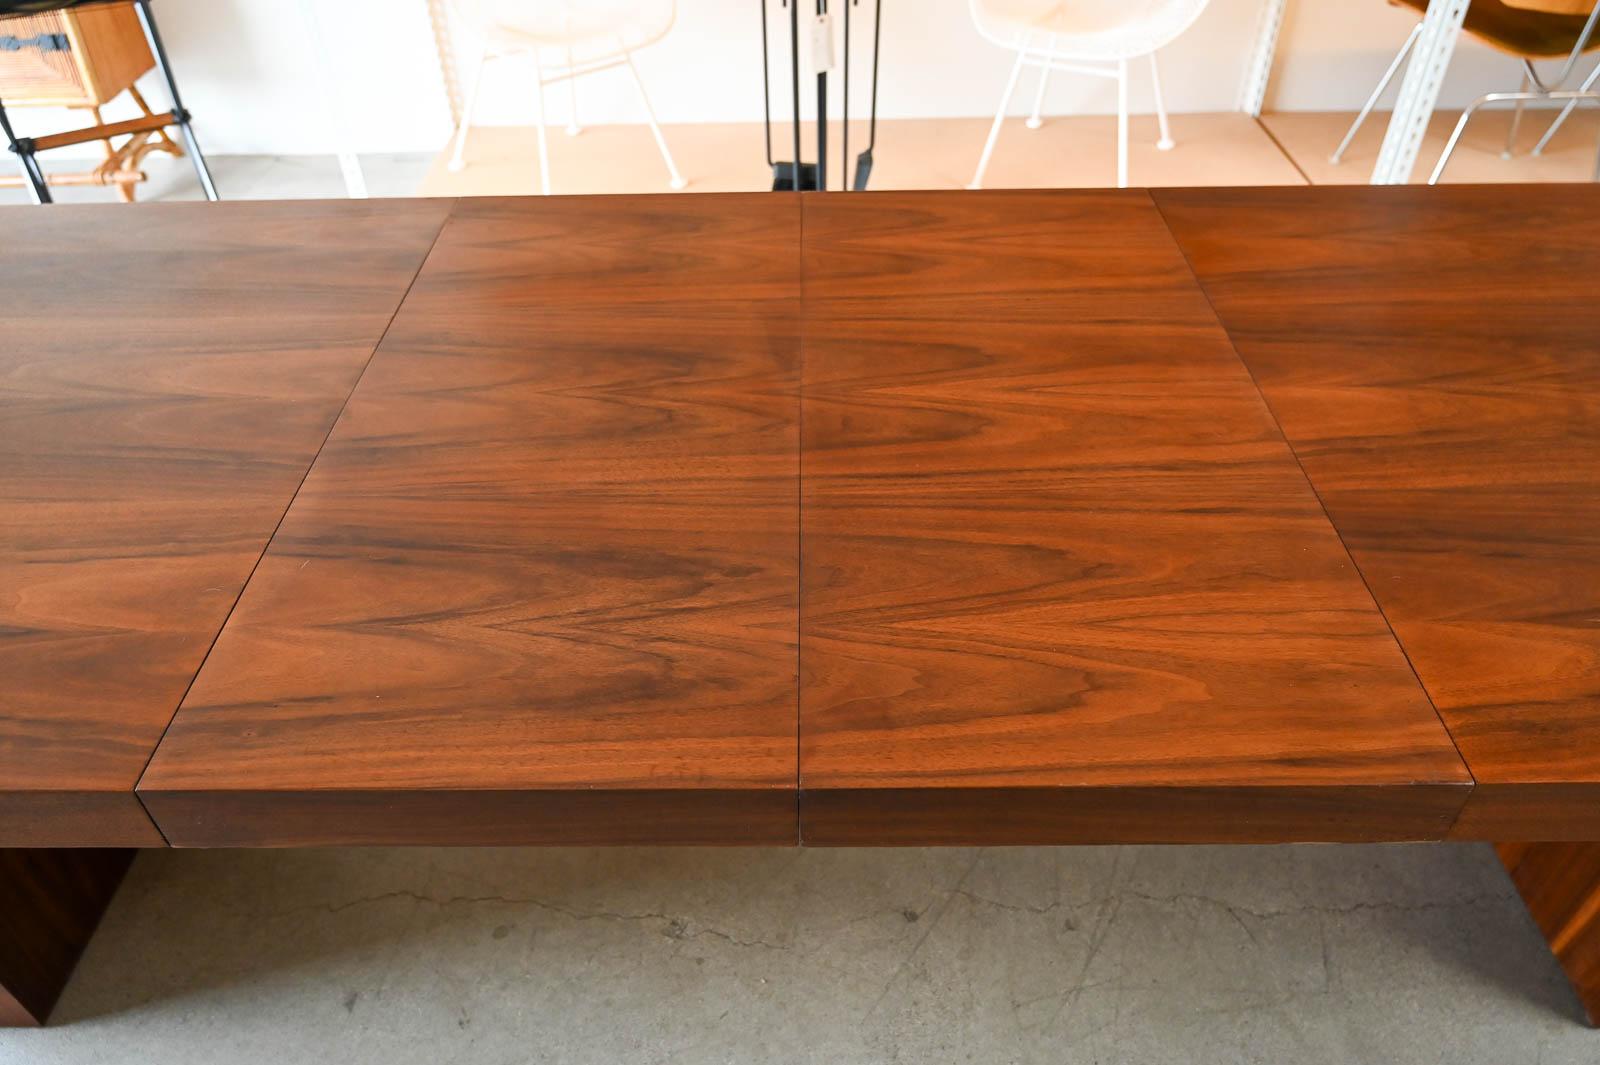 Late 20th Century Walnut Dining Table by Merton Gershun for Dillingham Esprit Collection, ca. 1970